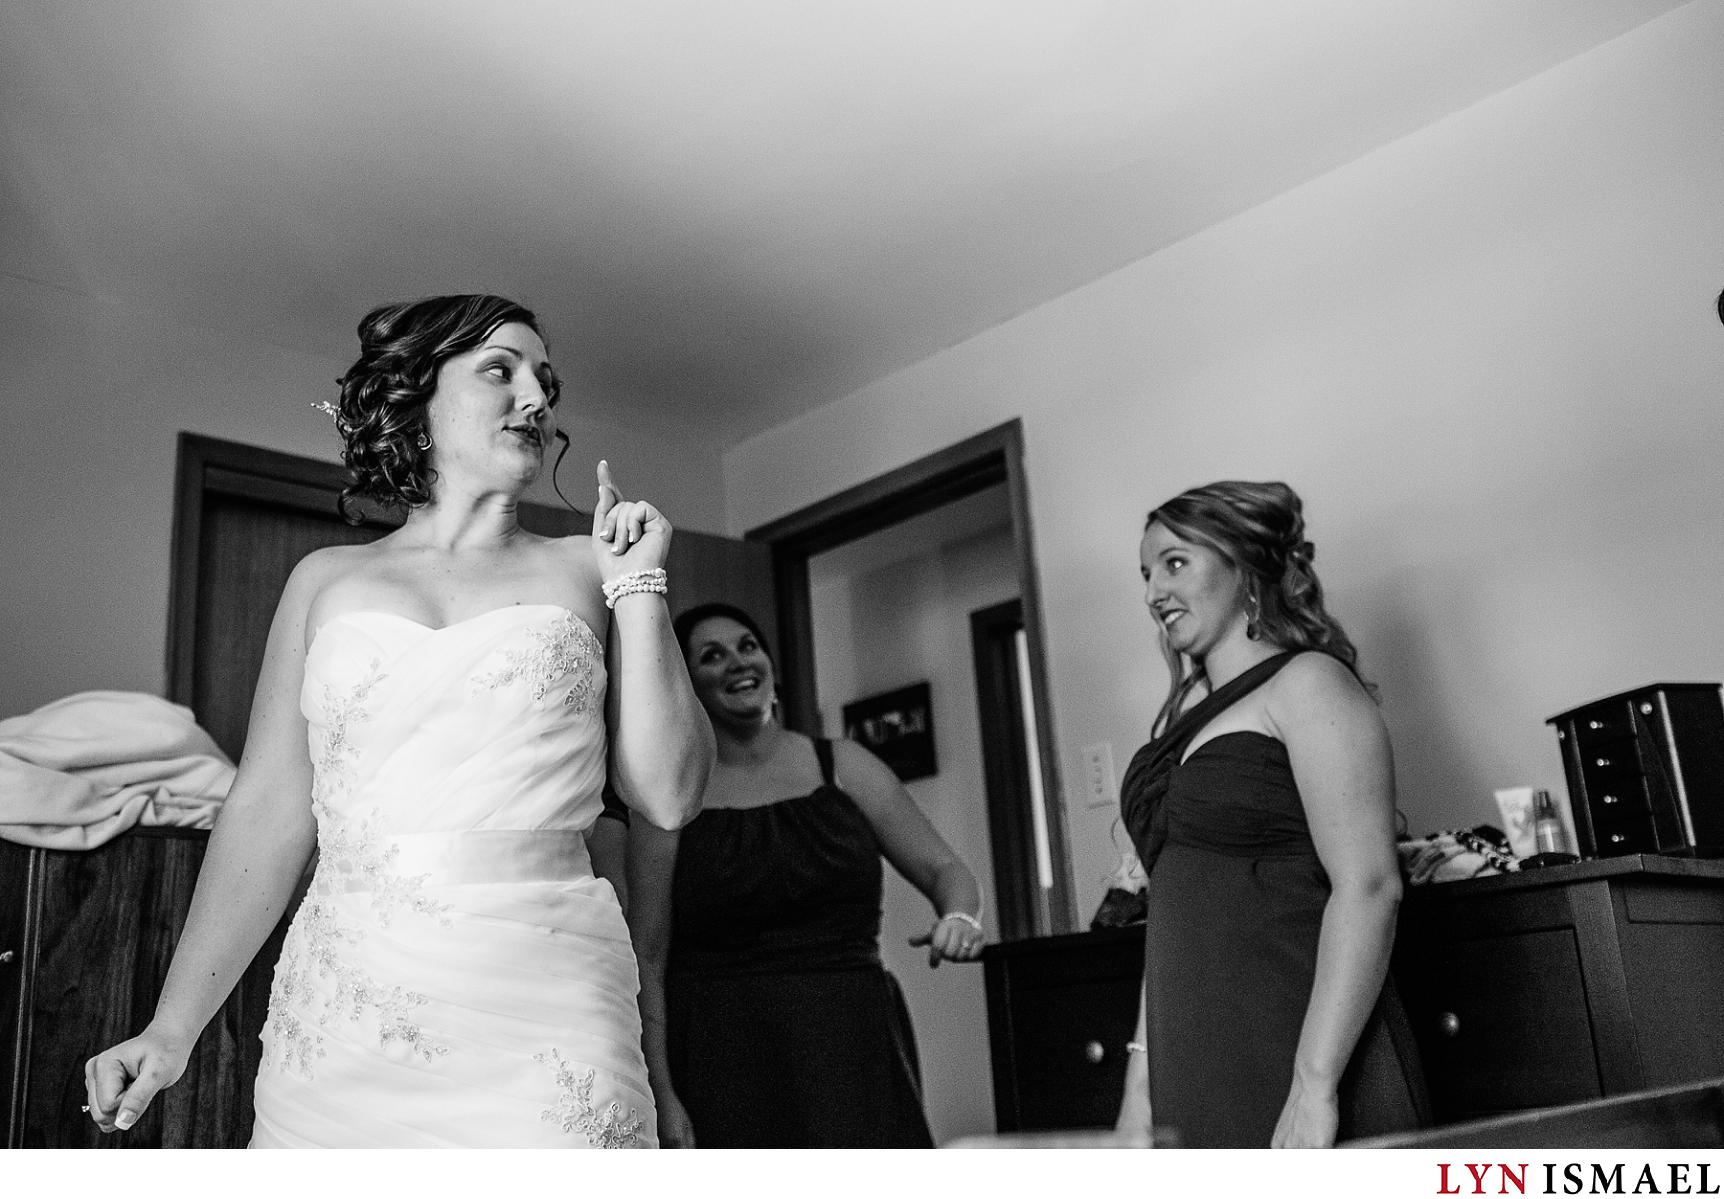 Bride gets ready and is helped by her bridesmaids.